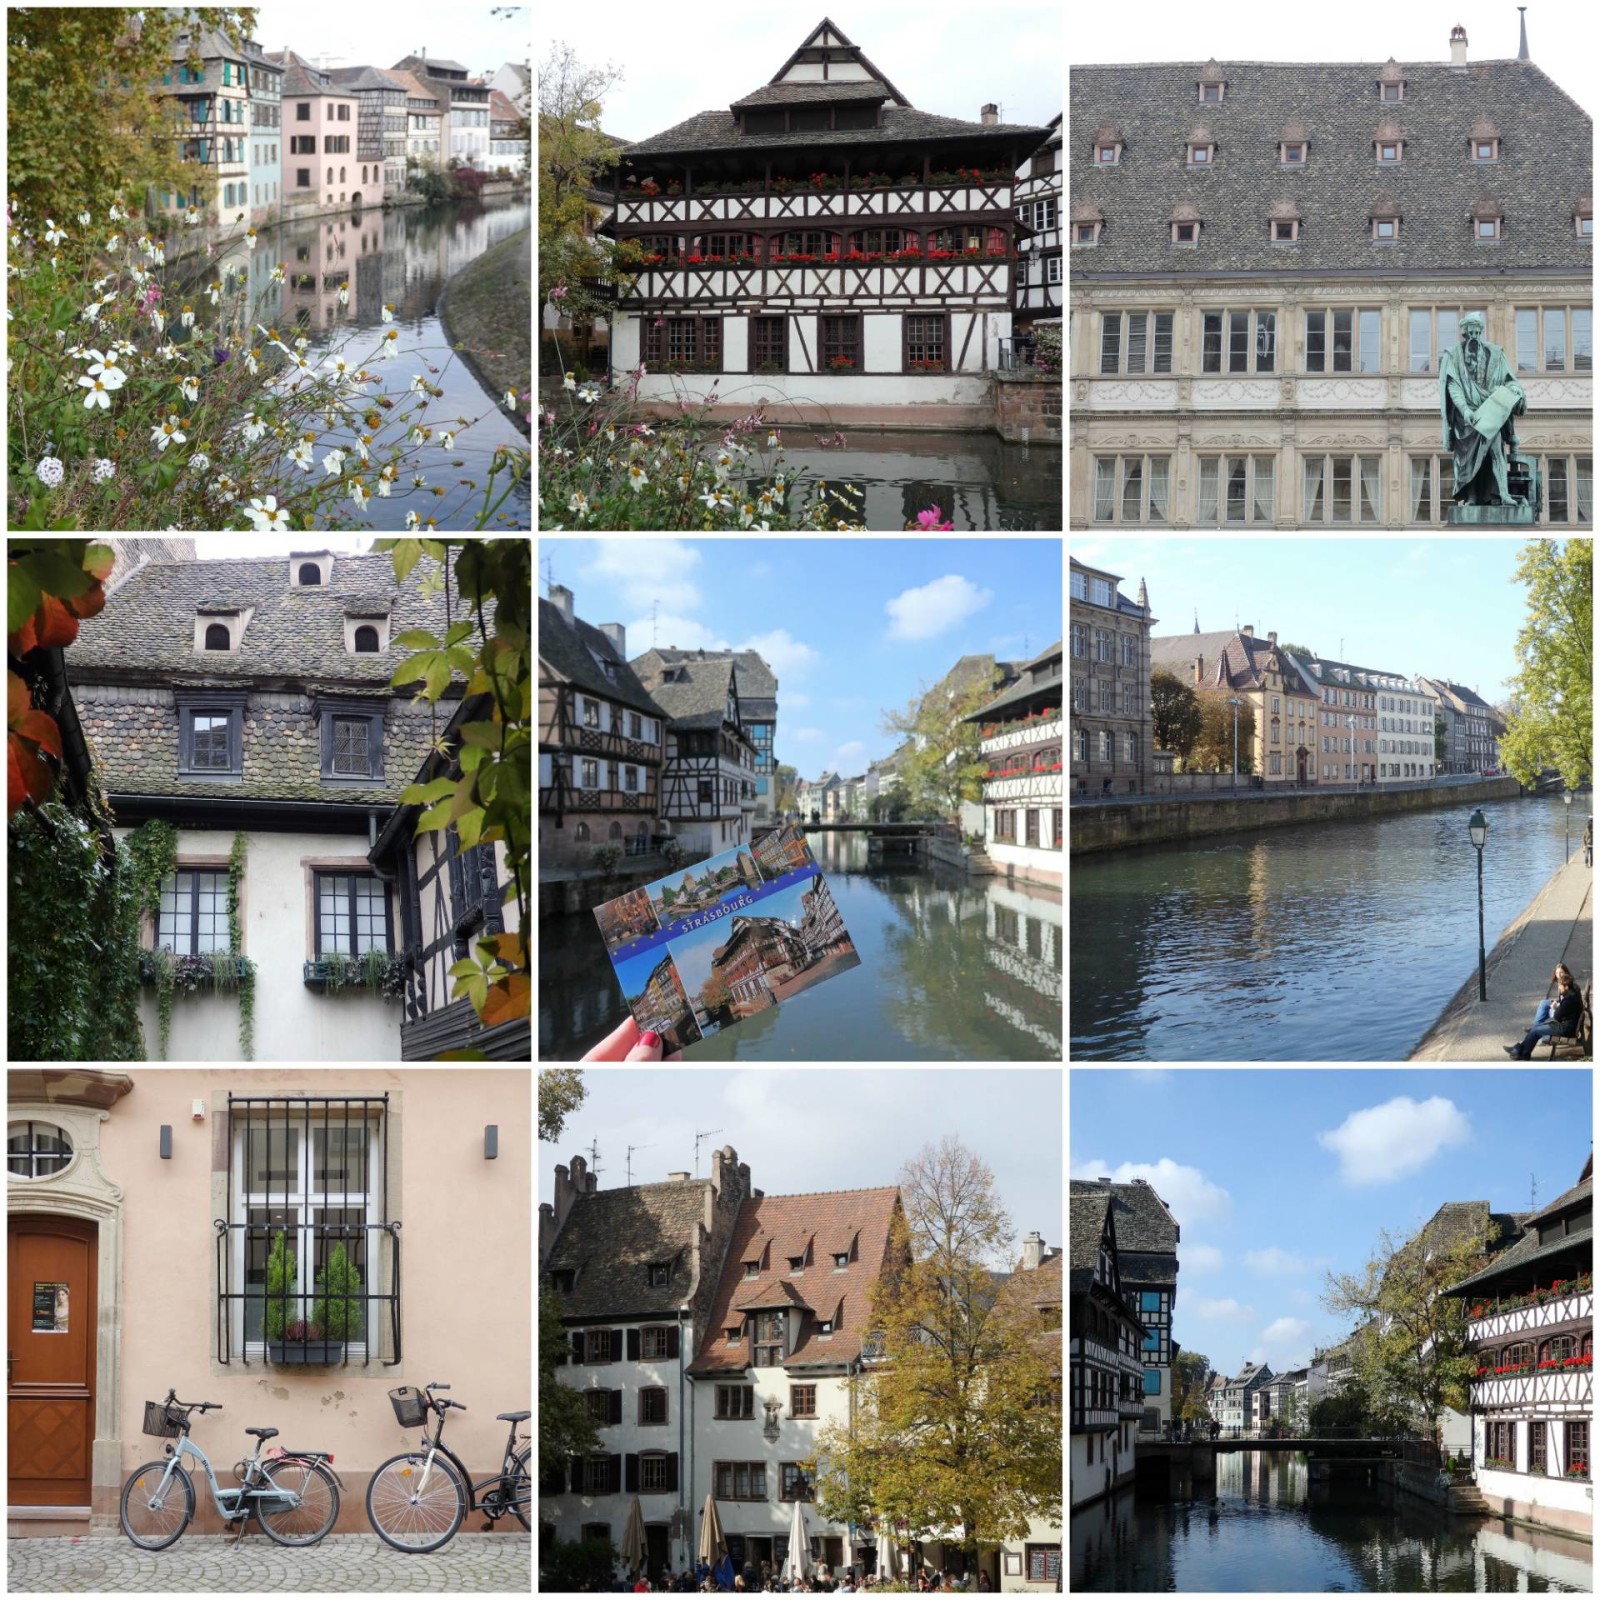 Where-Did-the-Wind-Blow-Me-and-a-few-other-reflections-My-2015-Review-Strasbourg